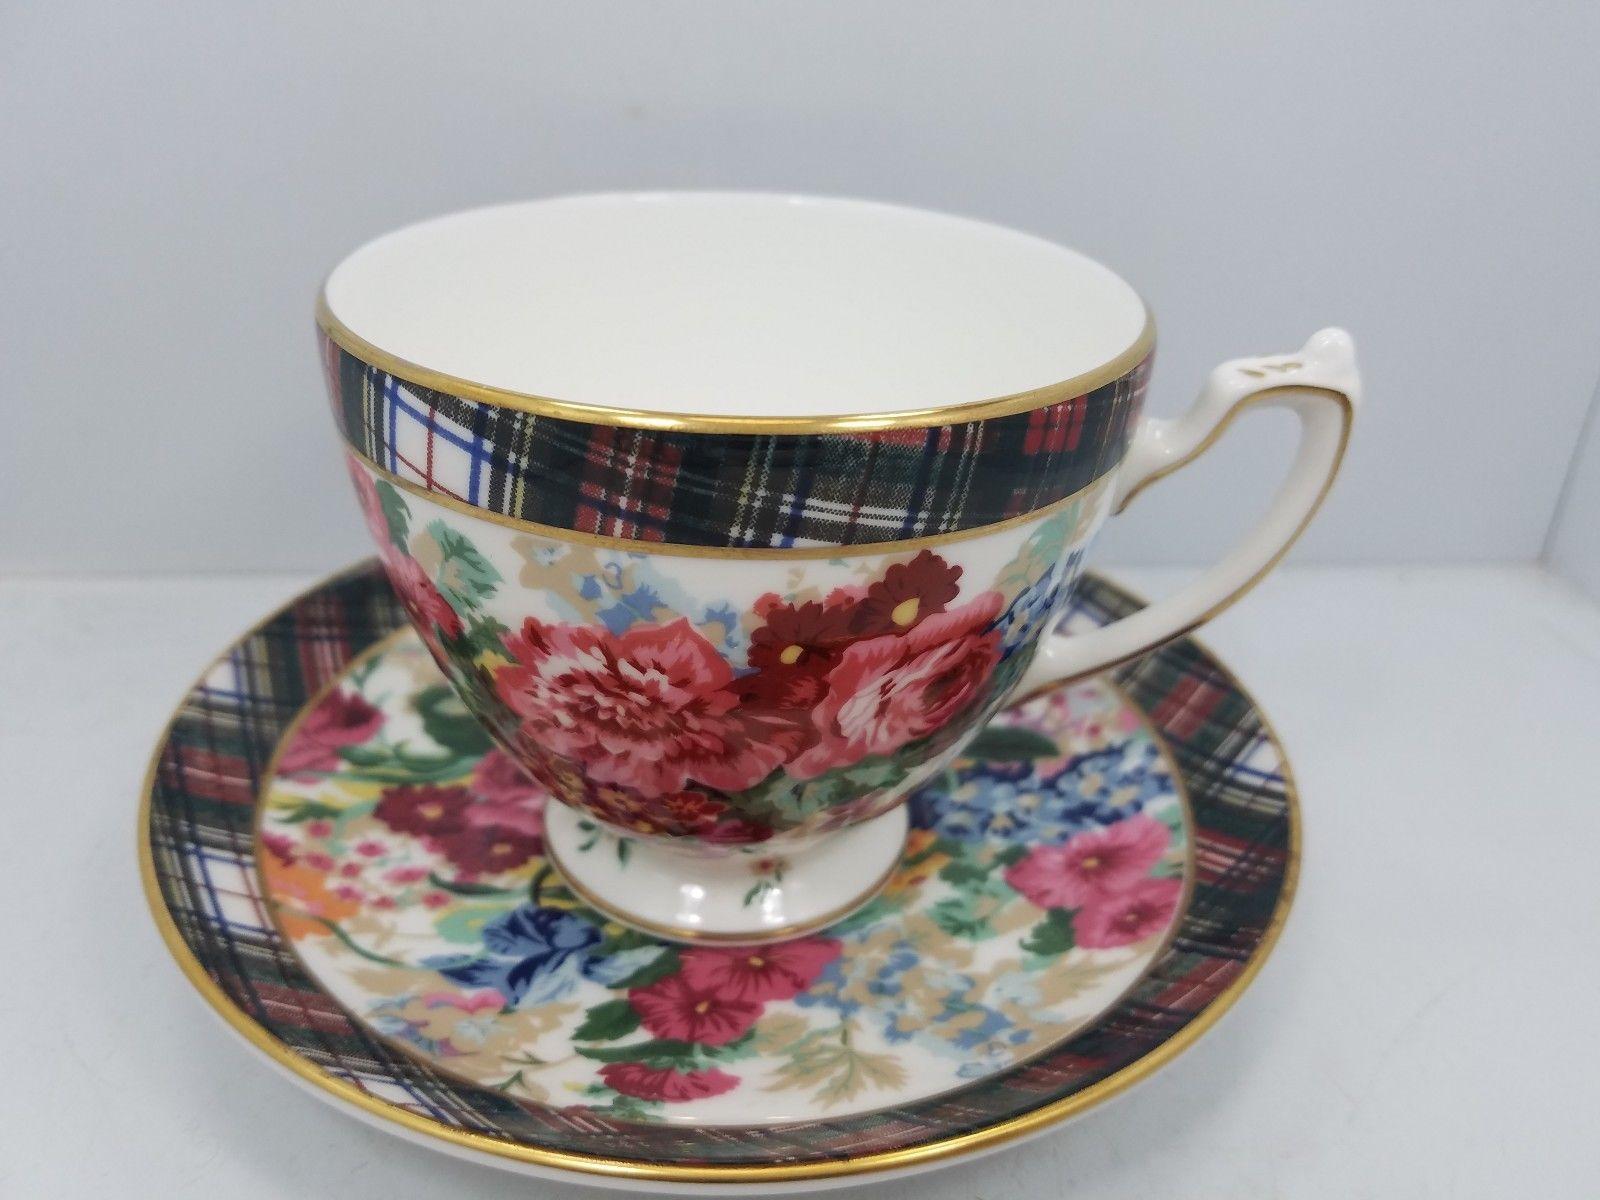 A set of1 12 (twelve) place settings in the Hampton Floral pattern by Ralph Lauren Home collection for Wedgwood. Porcelain. Signed, circa 1995-1996.

Features a tartan border with colorful floral pattern on white with gold rim. 

A total of 60